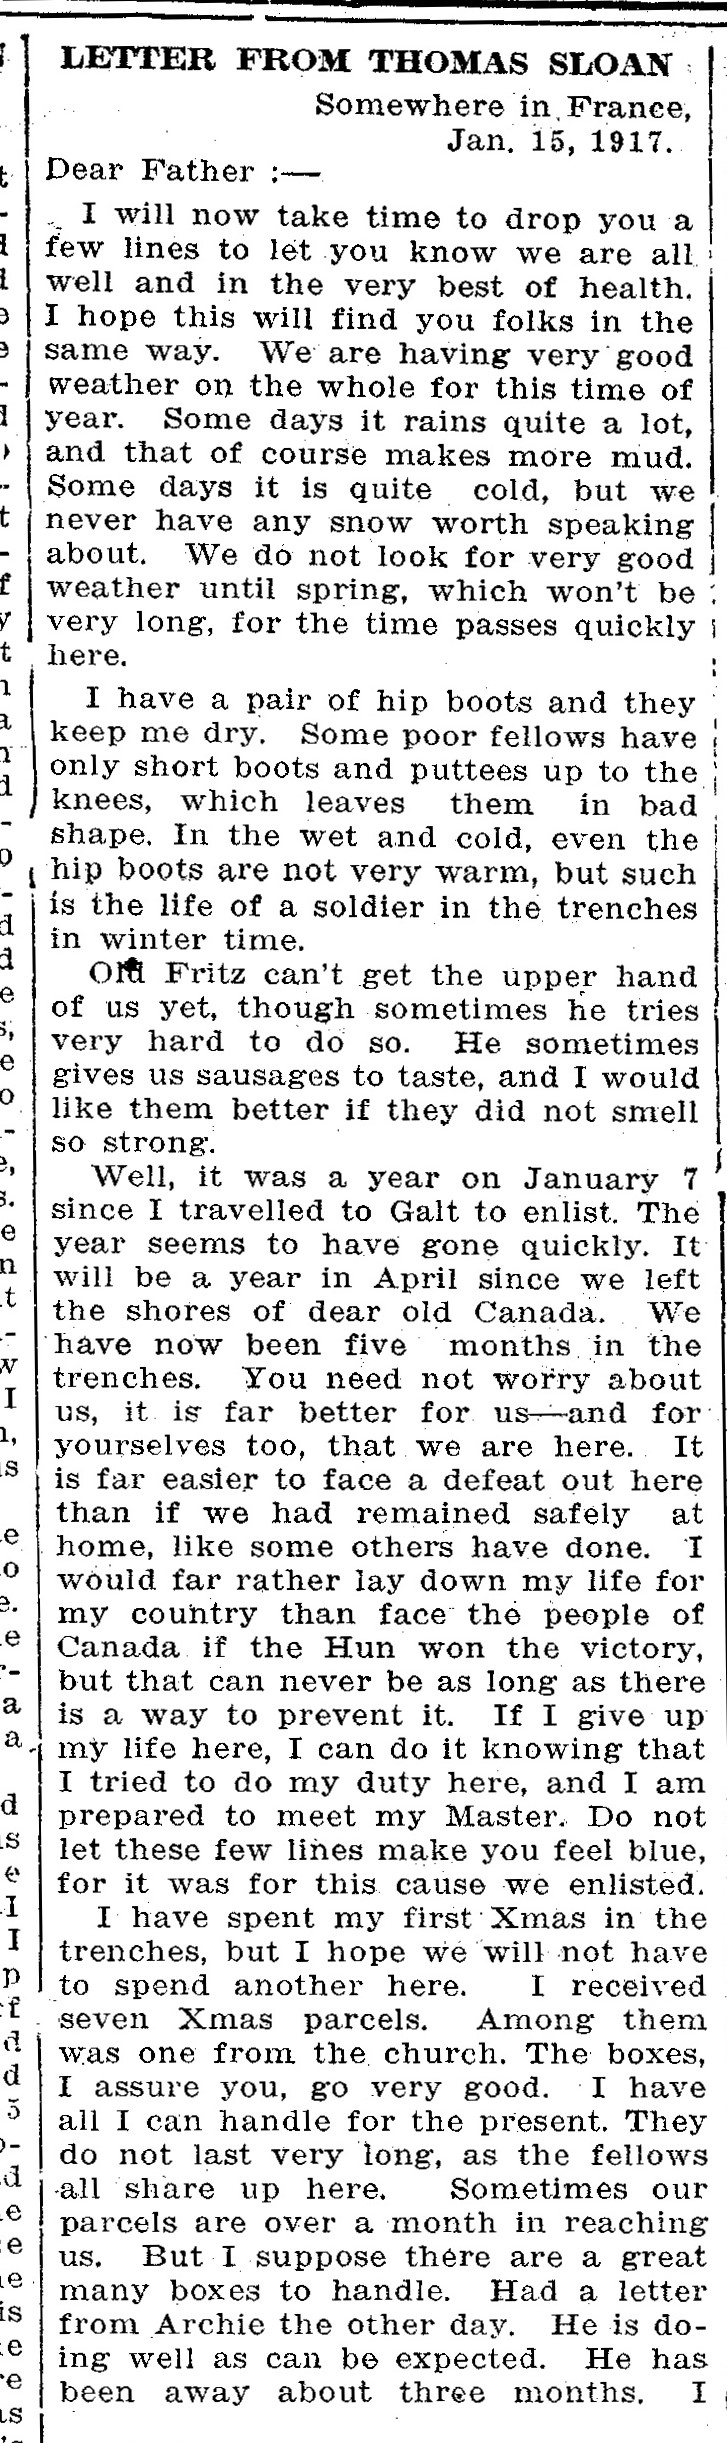 The Chesley Enterprise, March 15, 1917 (1 of 2) 